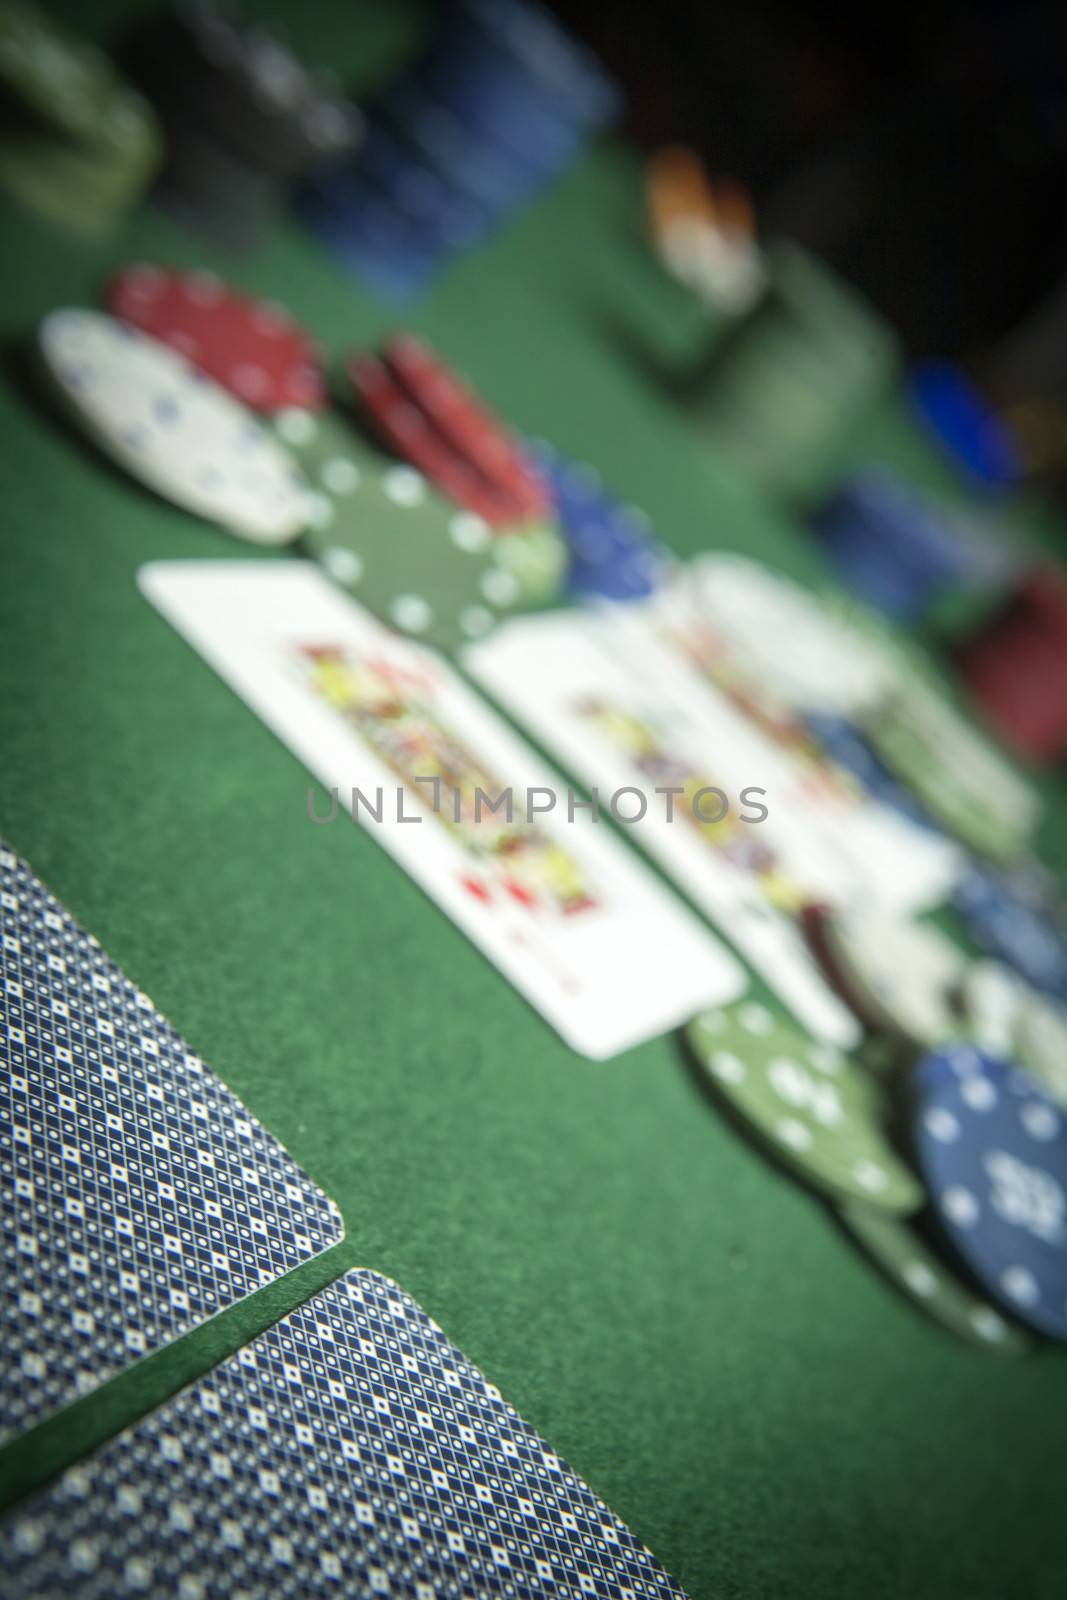 cards poker deck English, poker chips stack on green table 